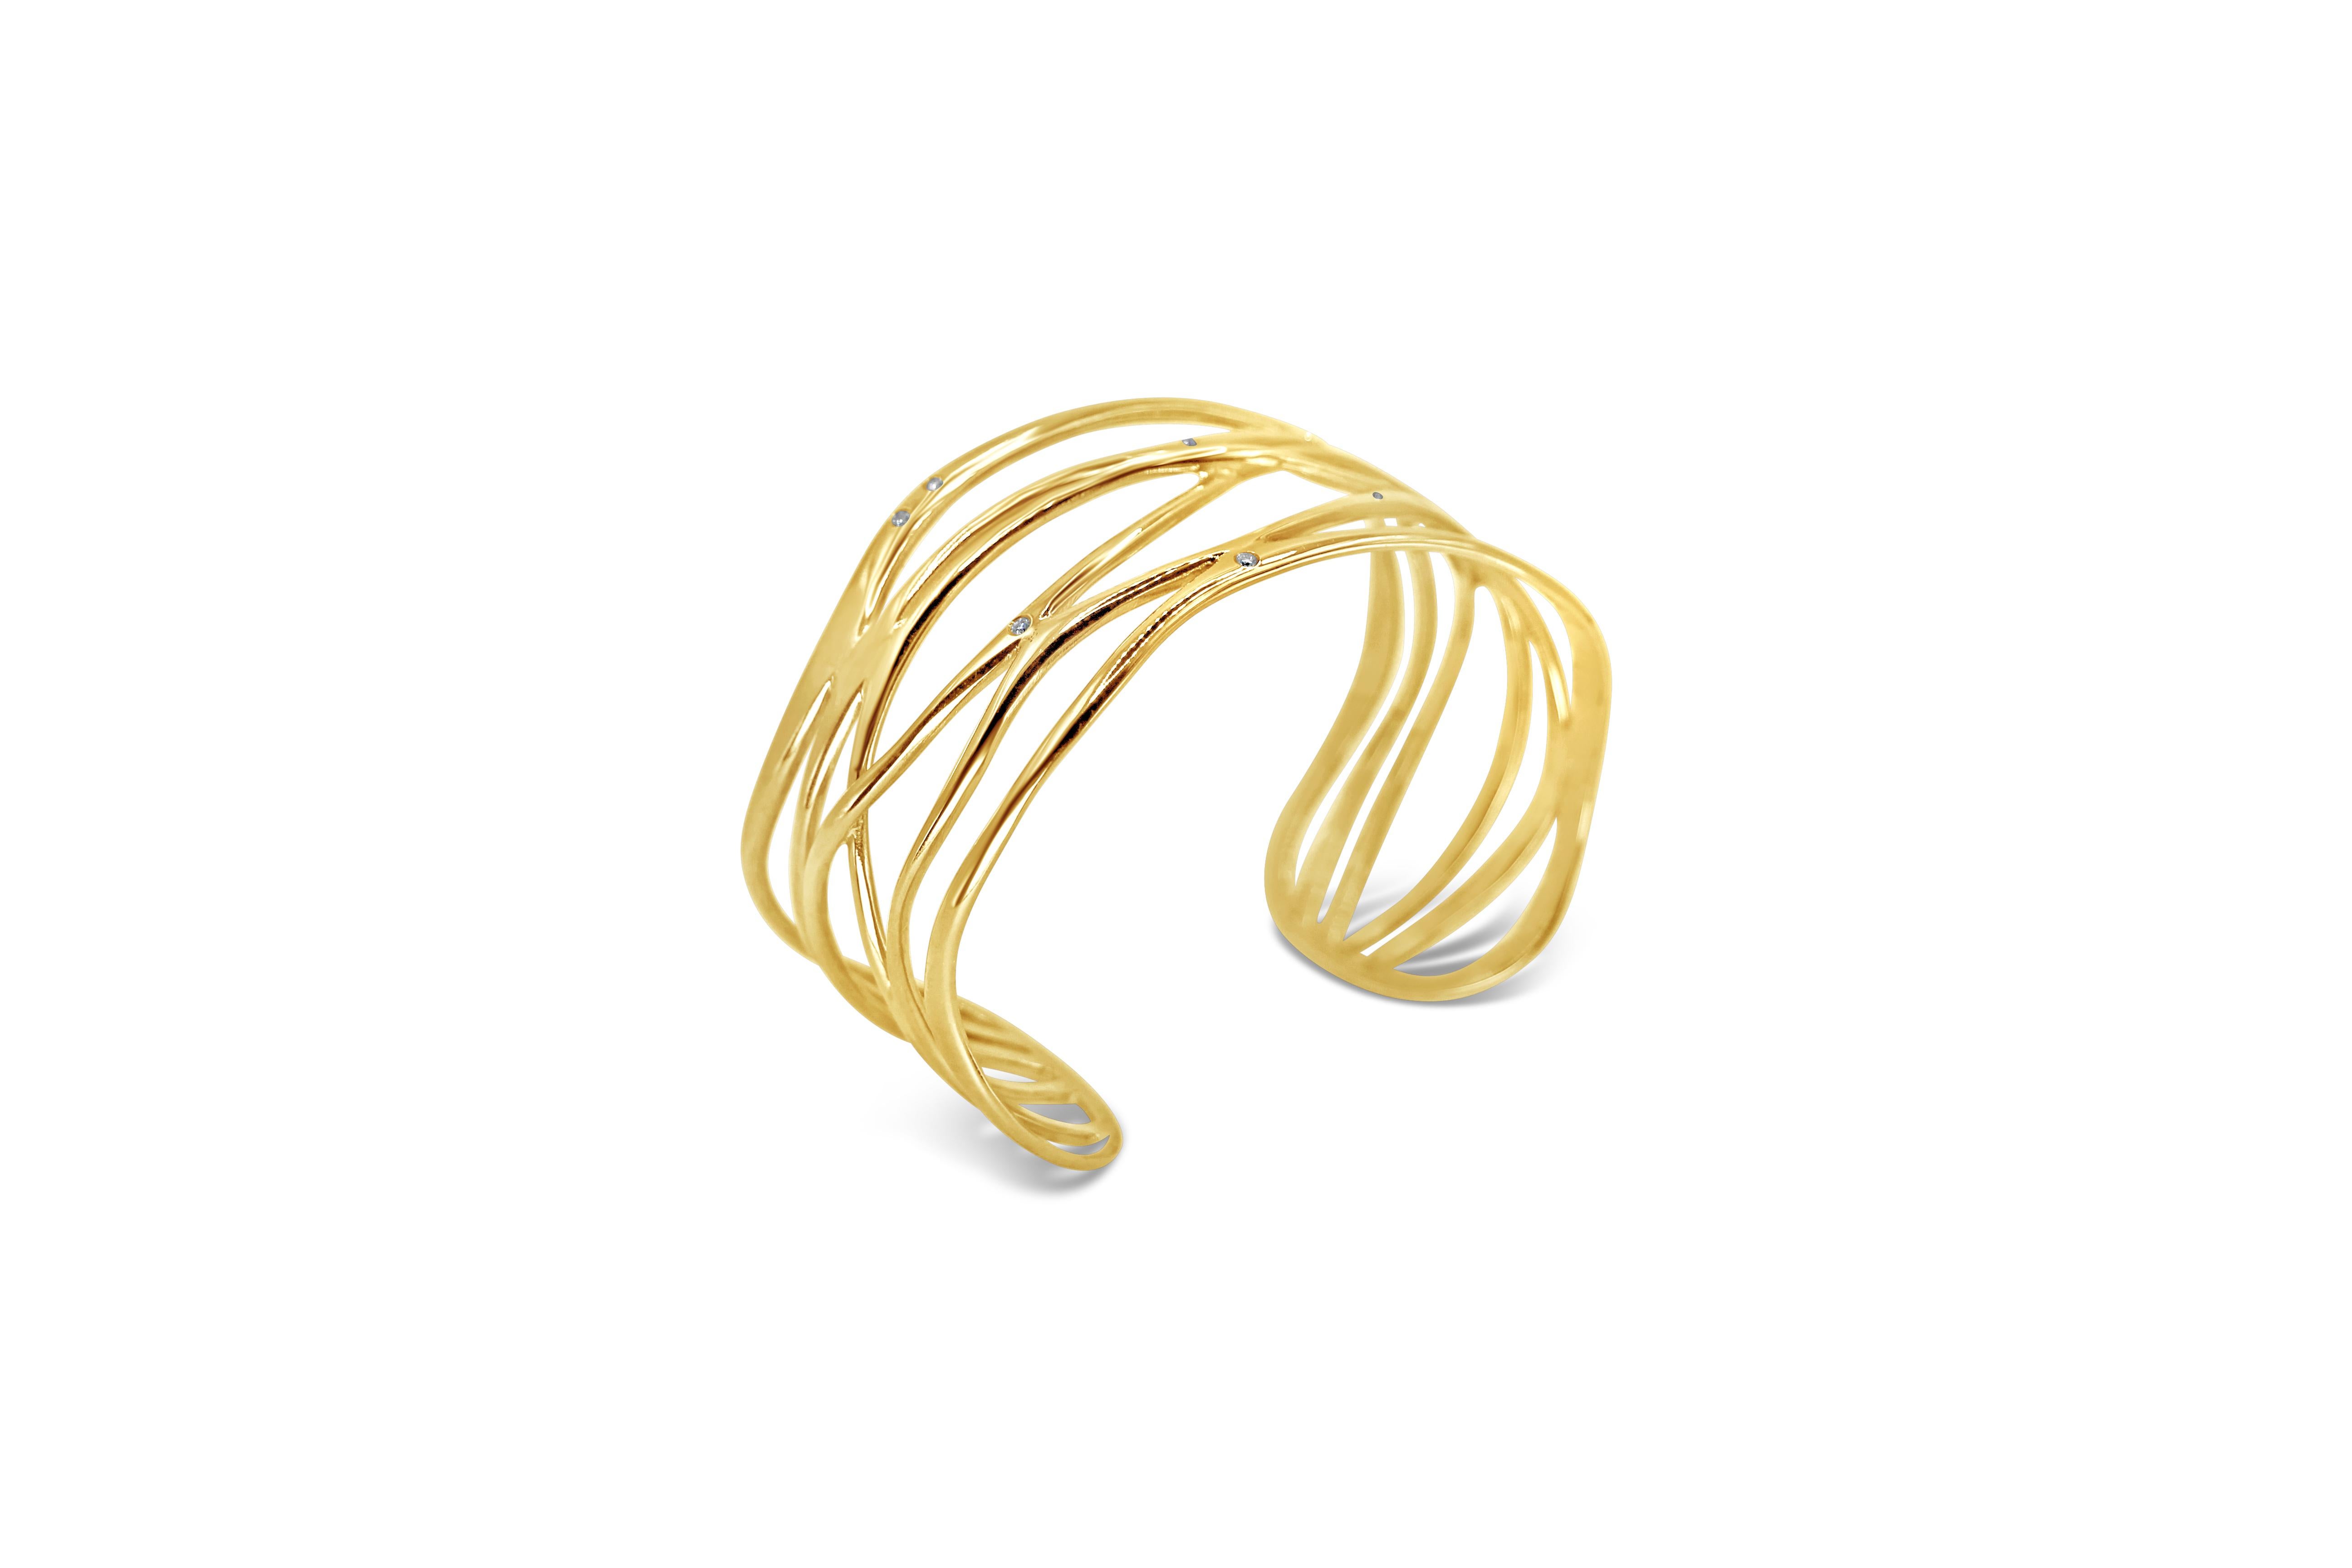 Sea Waves Cage Cuff Bracelet with white brilliant cut diamonds handcrafted in 18Kt solid yellow gold.
Elegant stripes of 18Kt gold create this delicate shape in the bracelet giving the sense of a smooth wave around your wrist. The white brilliant